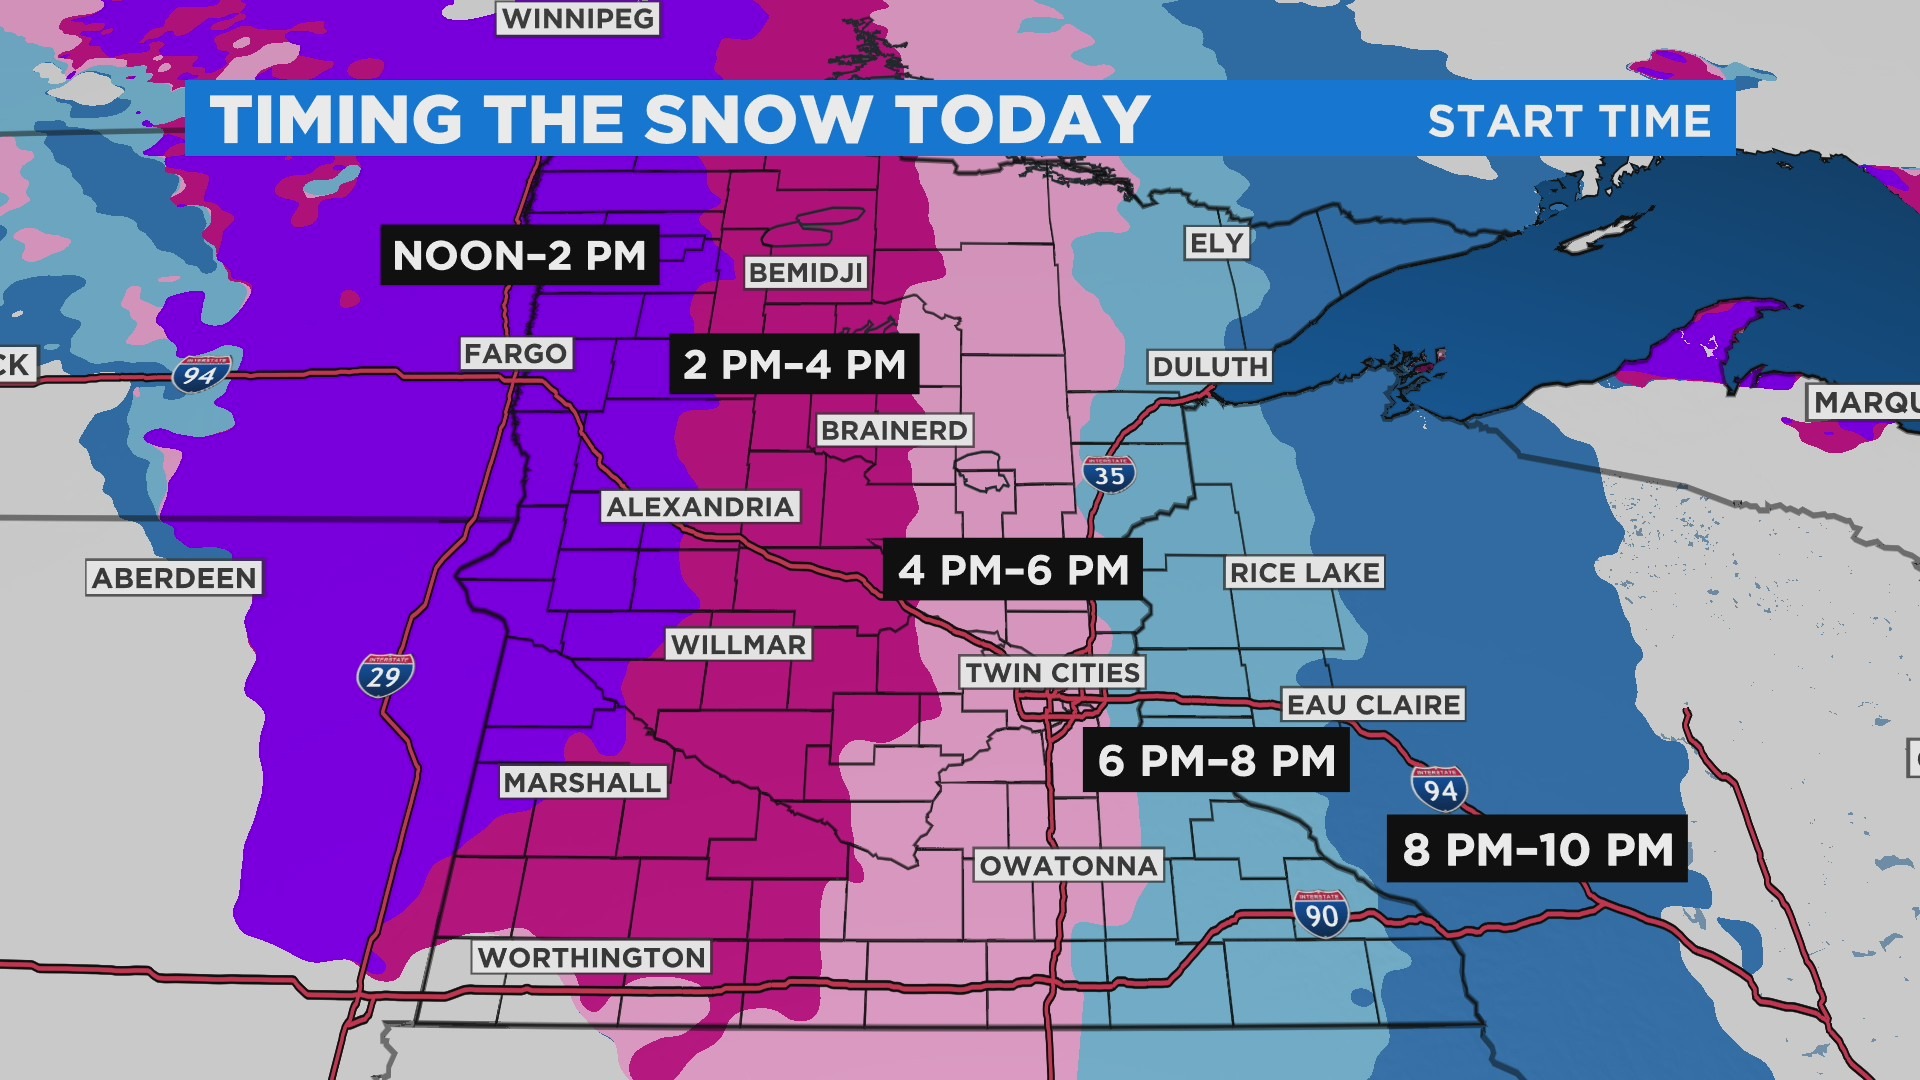 Minnesota Weather: Next Dose Of Snow Could Make For Commute Headaches